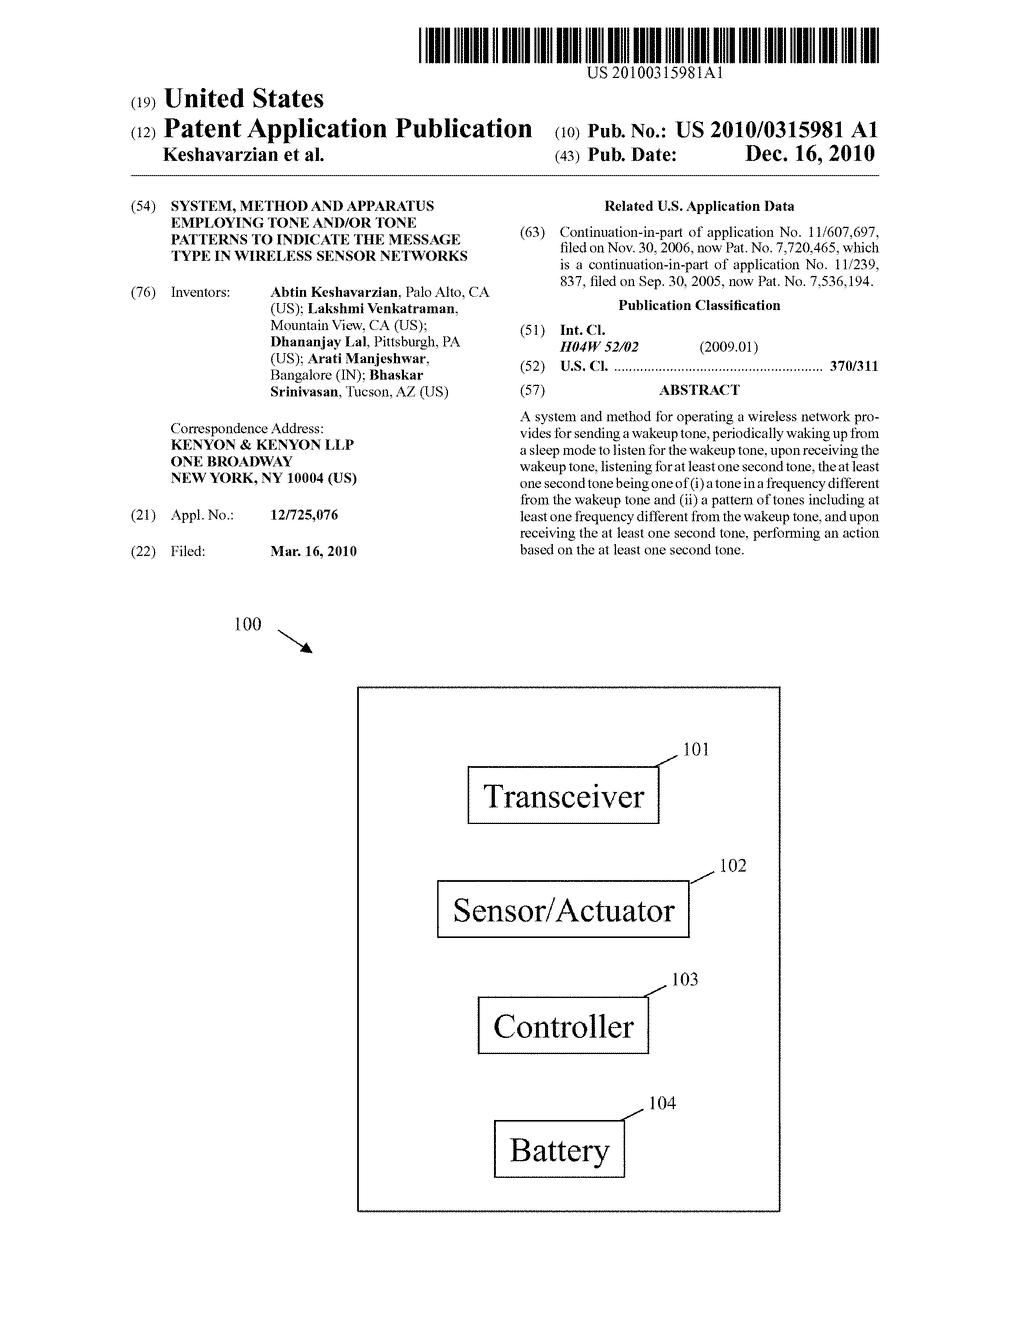 SYSTEM, METHOD AND APPARATUS EMPLOYING TONE AND/OR TONE PATTERNS TO INDICATE THE MESSAGE TYPE IN WIRELESS SENSOR NETWORKS - diagram, schematic, and image 01